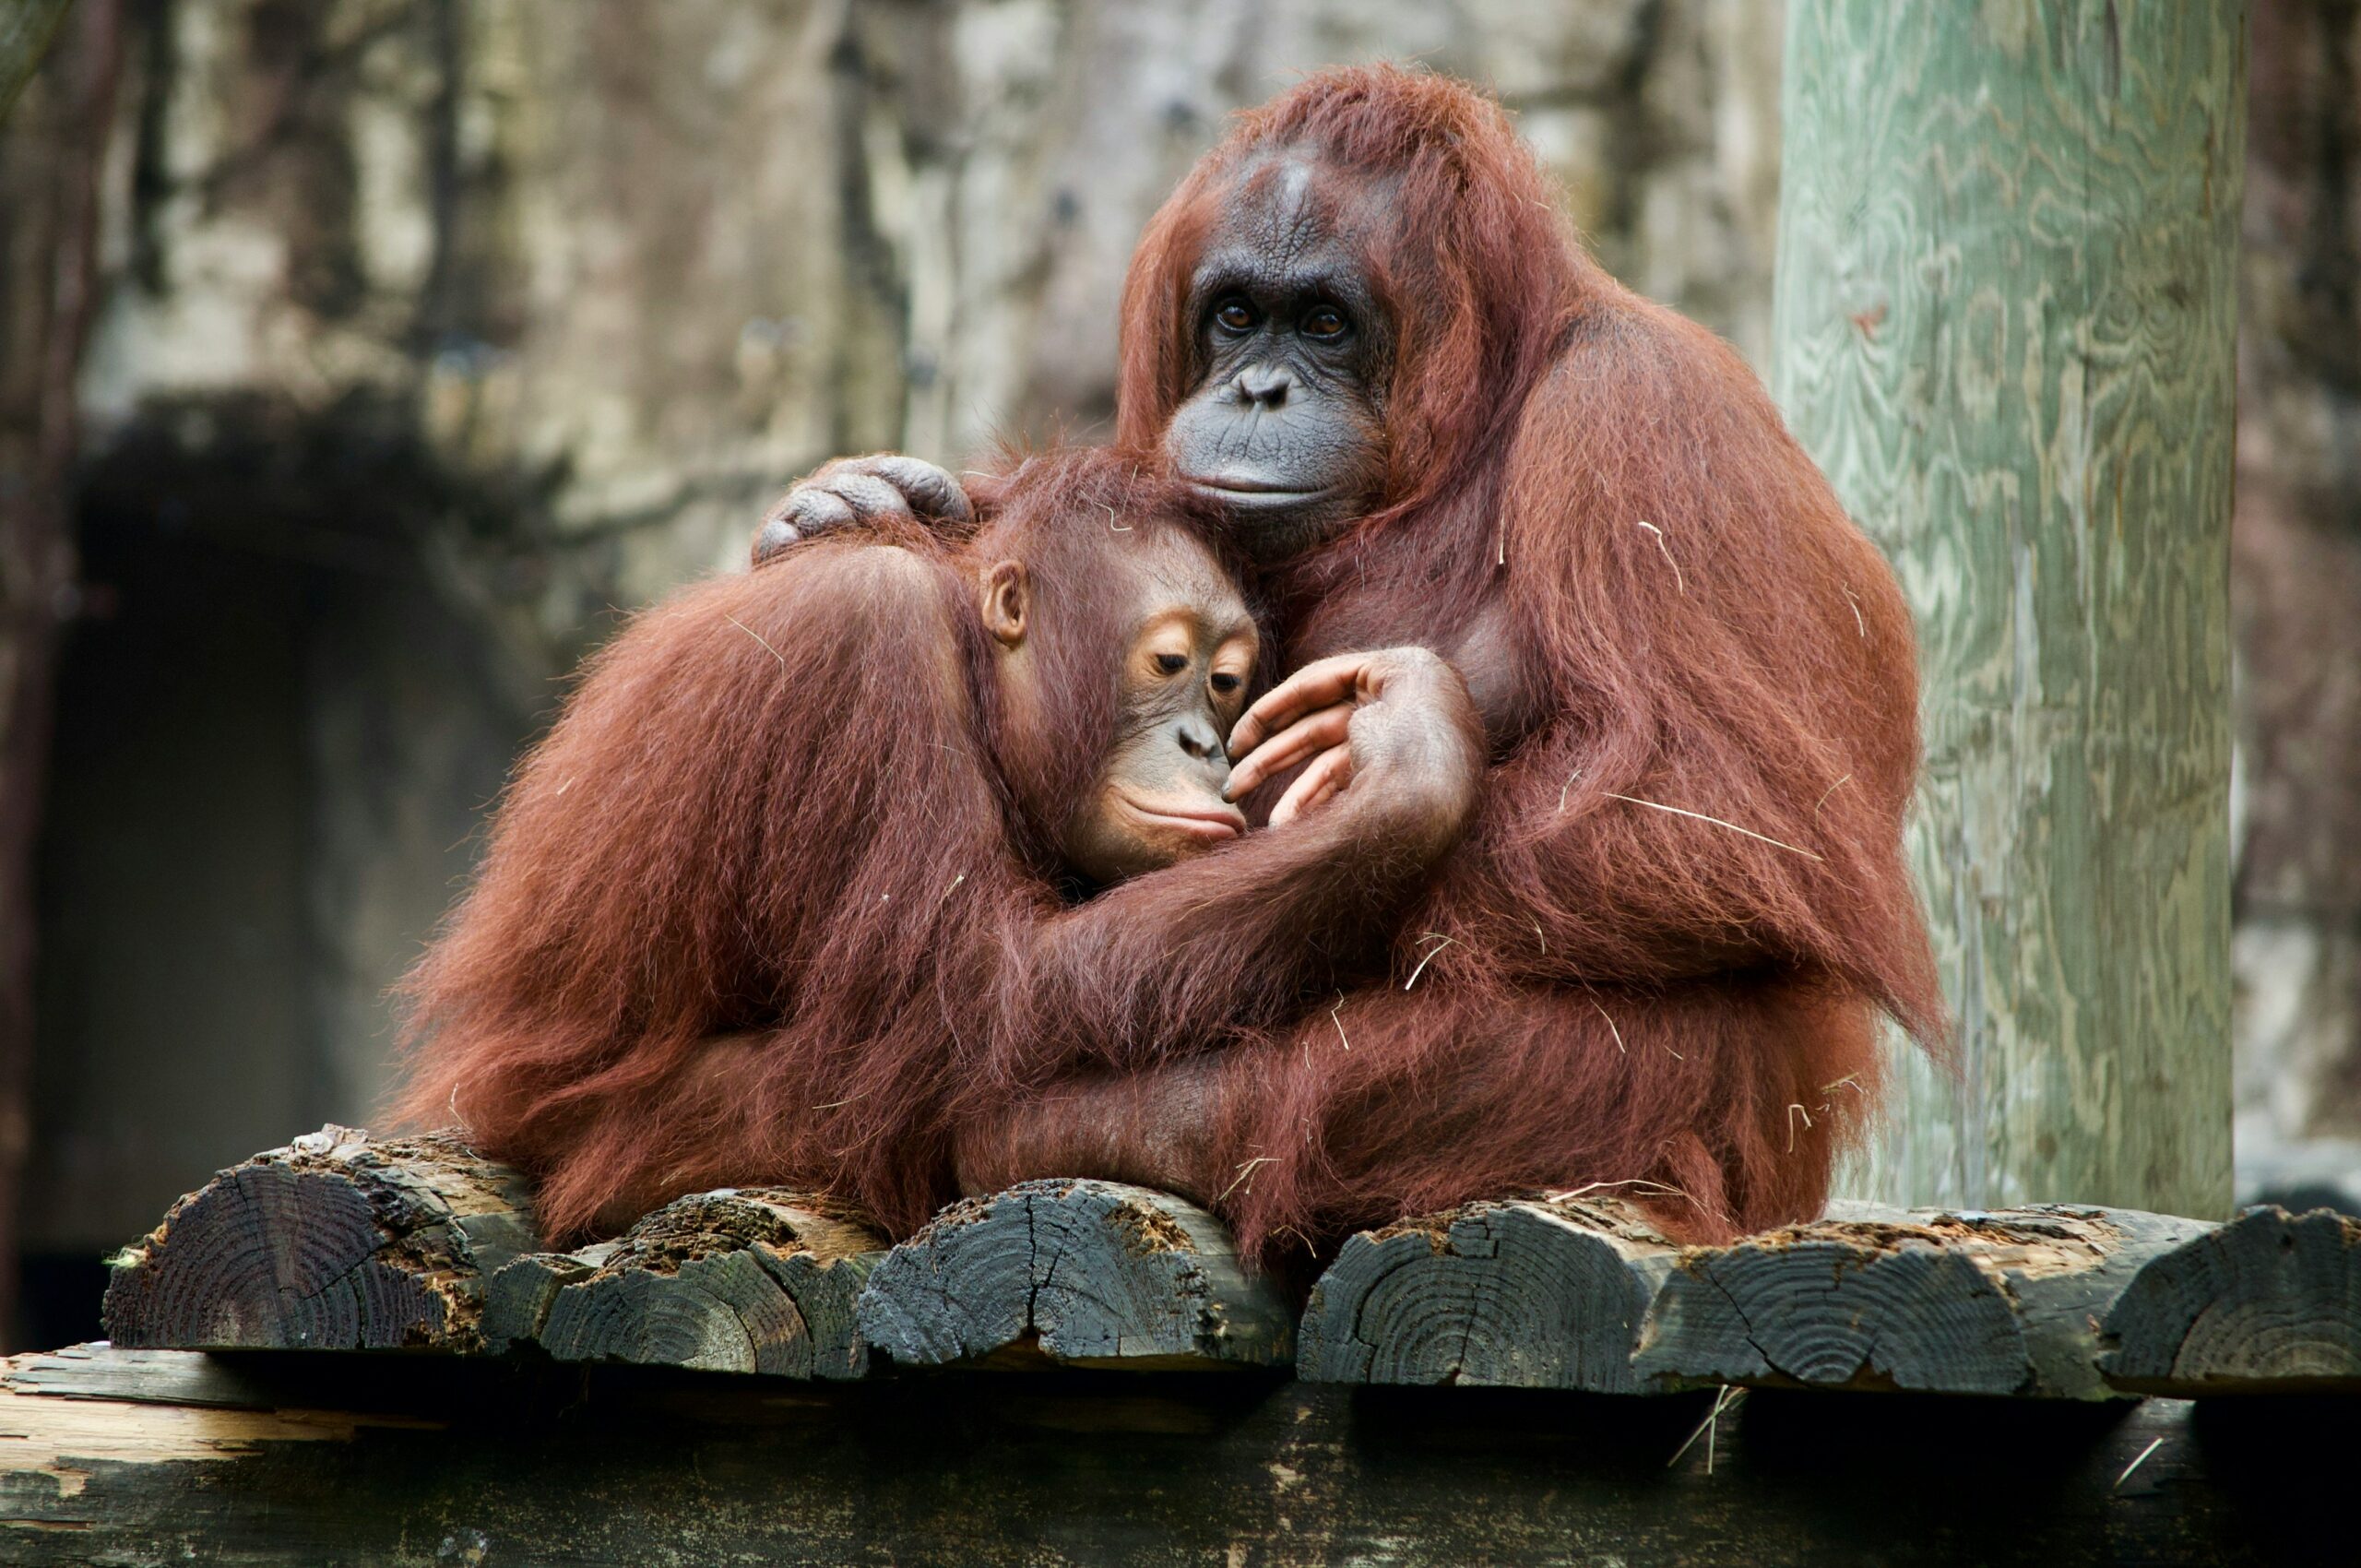 A mother orangutan and her baby cuddling